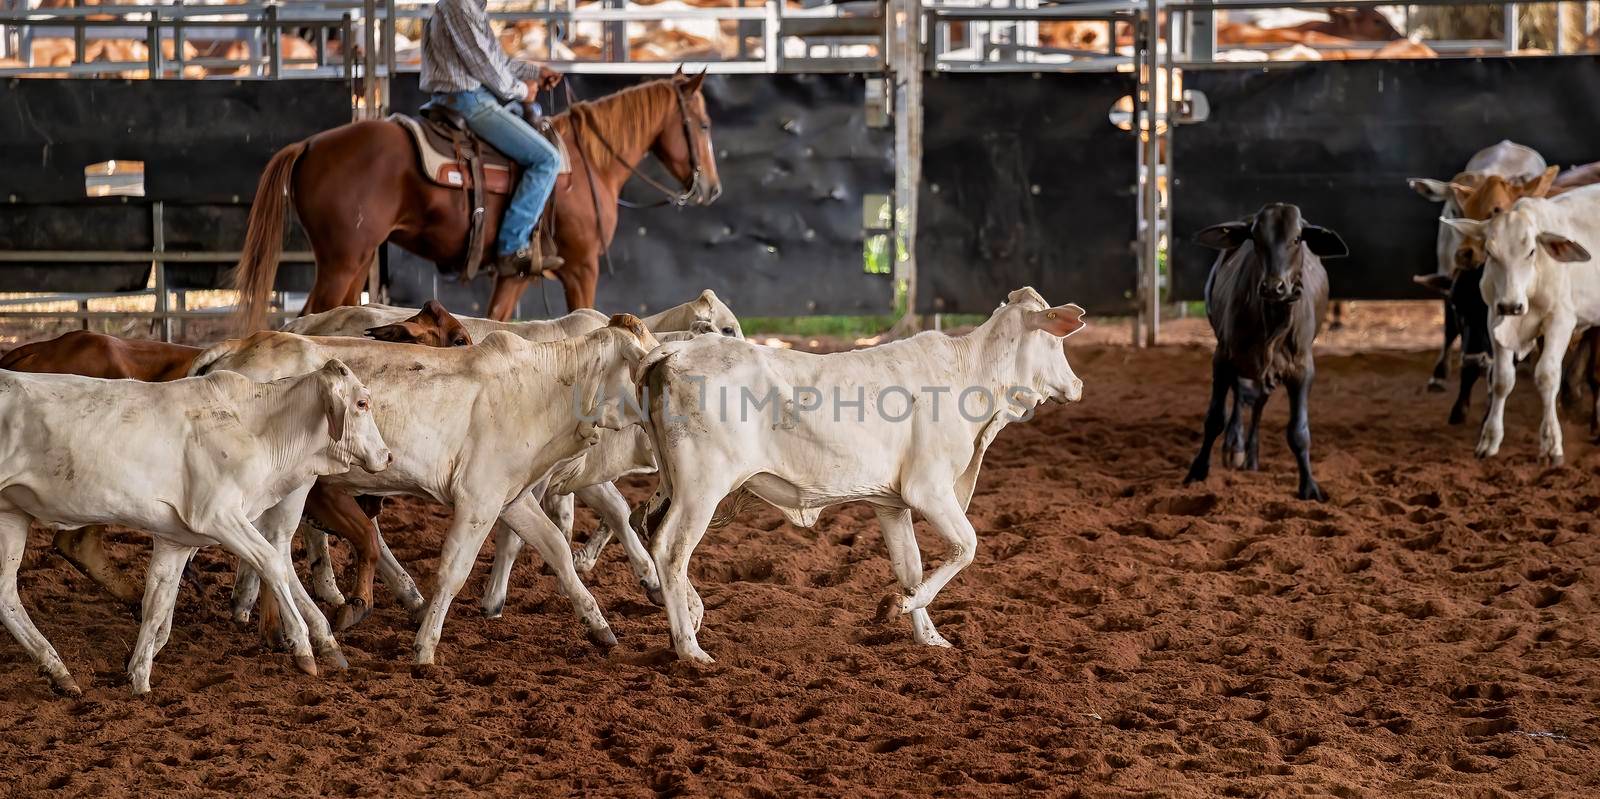 A horse and rider herding calves in a western style equestrian cutting competition